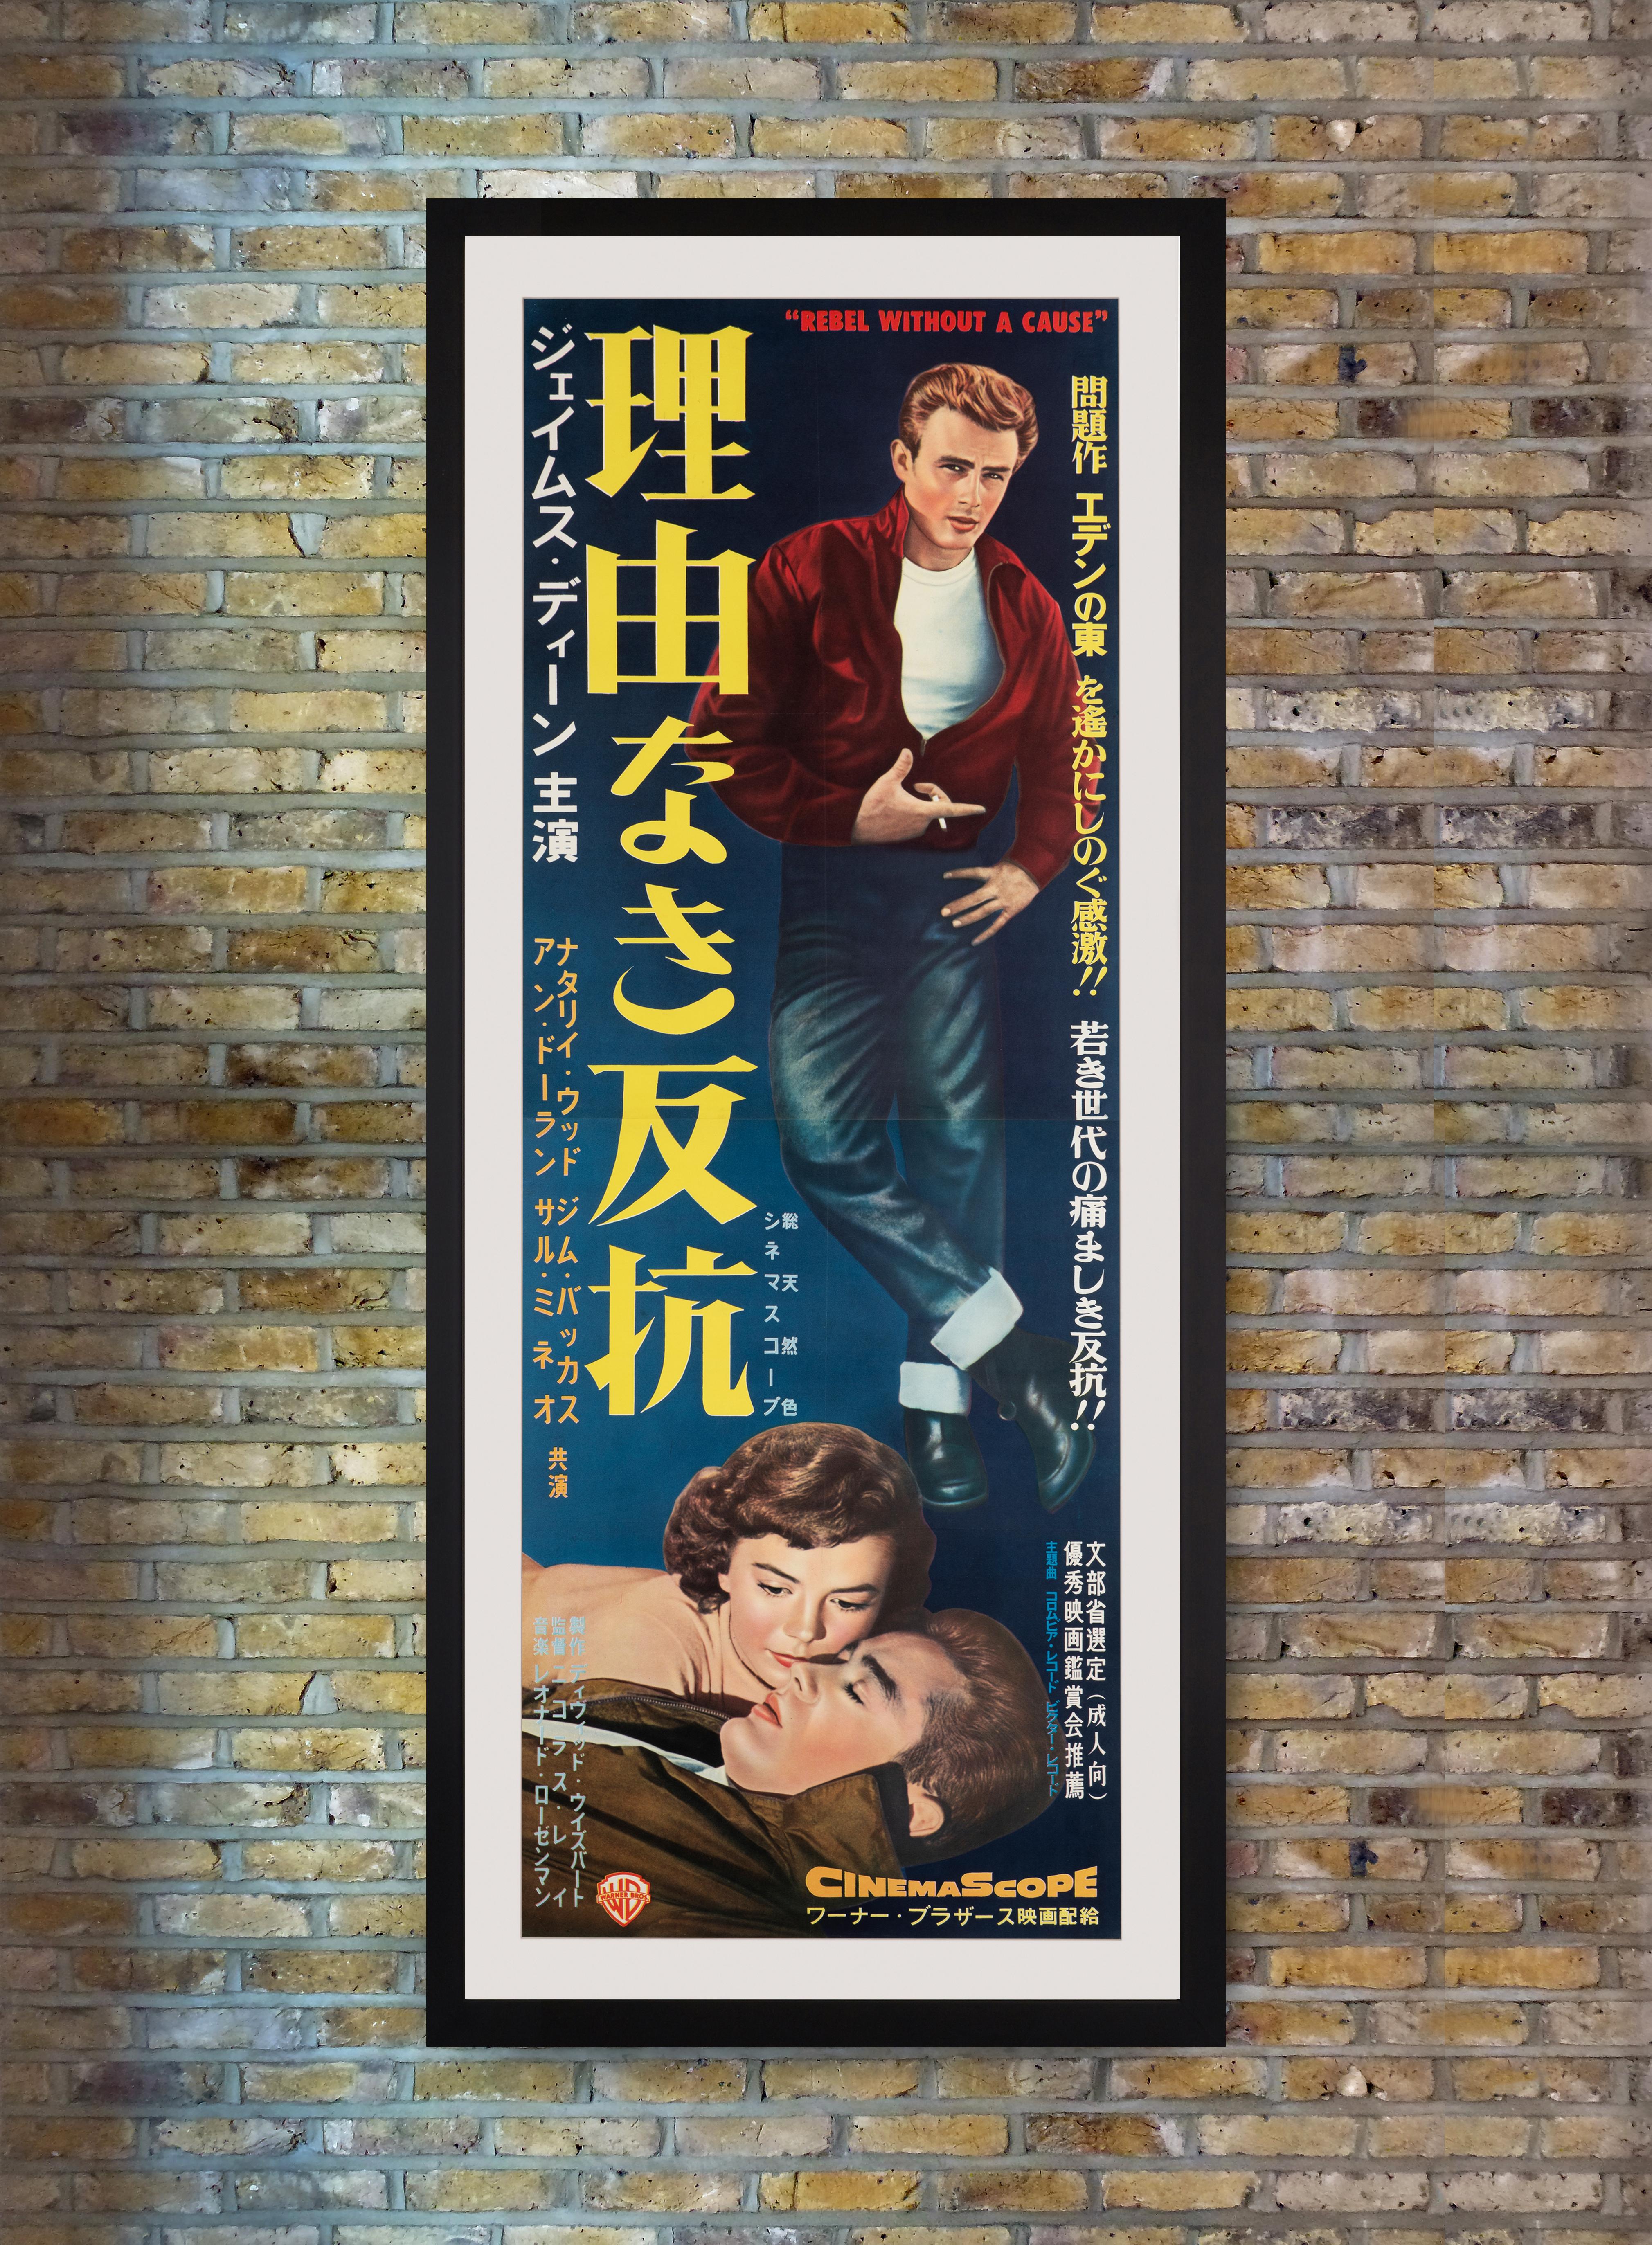 A full-length James Dean smoulders on this exceedingly rare two-panel poster for the first Japanese release of the classic 1955 teenage drama 'Rebel Without A Cause' in April 1956. Starring Dean in his most celebrated role as a troubled teen